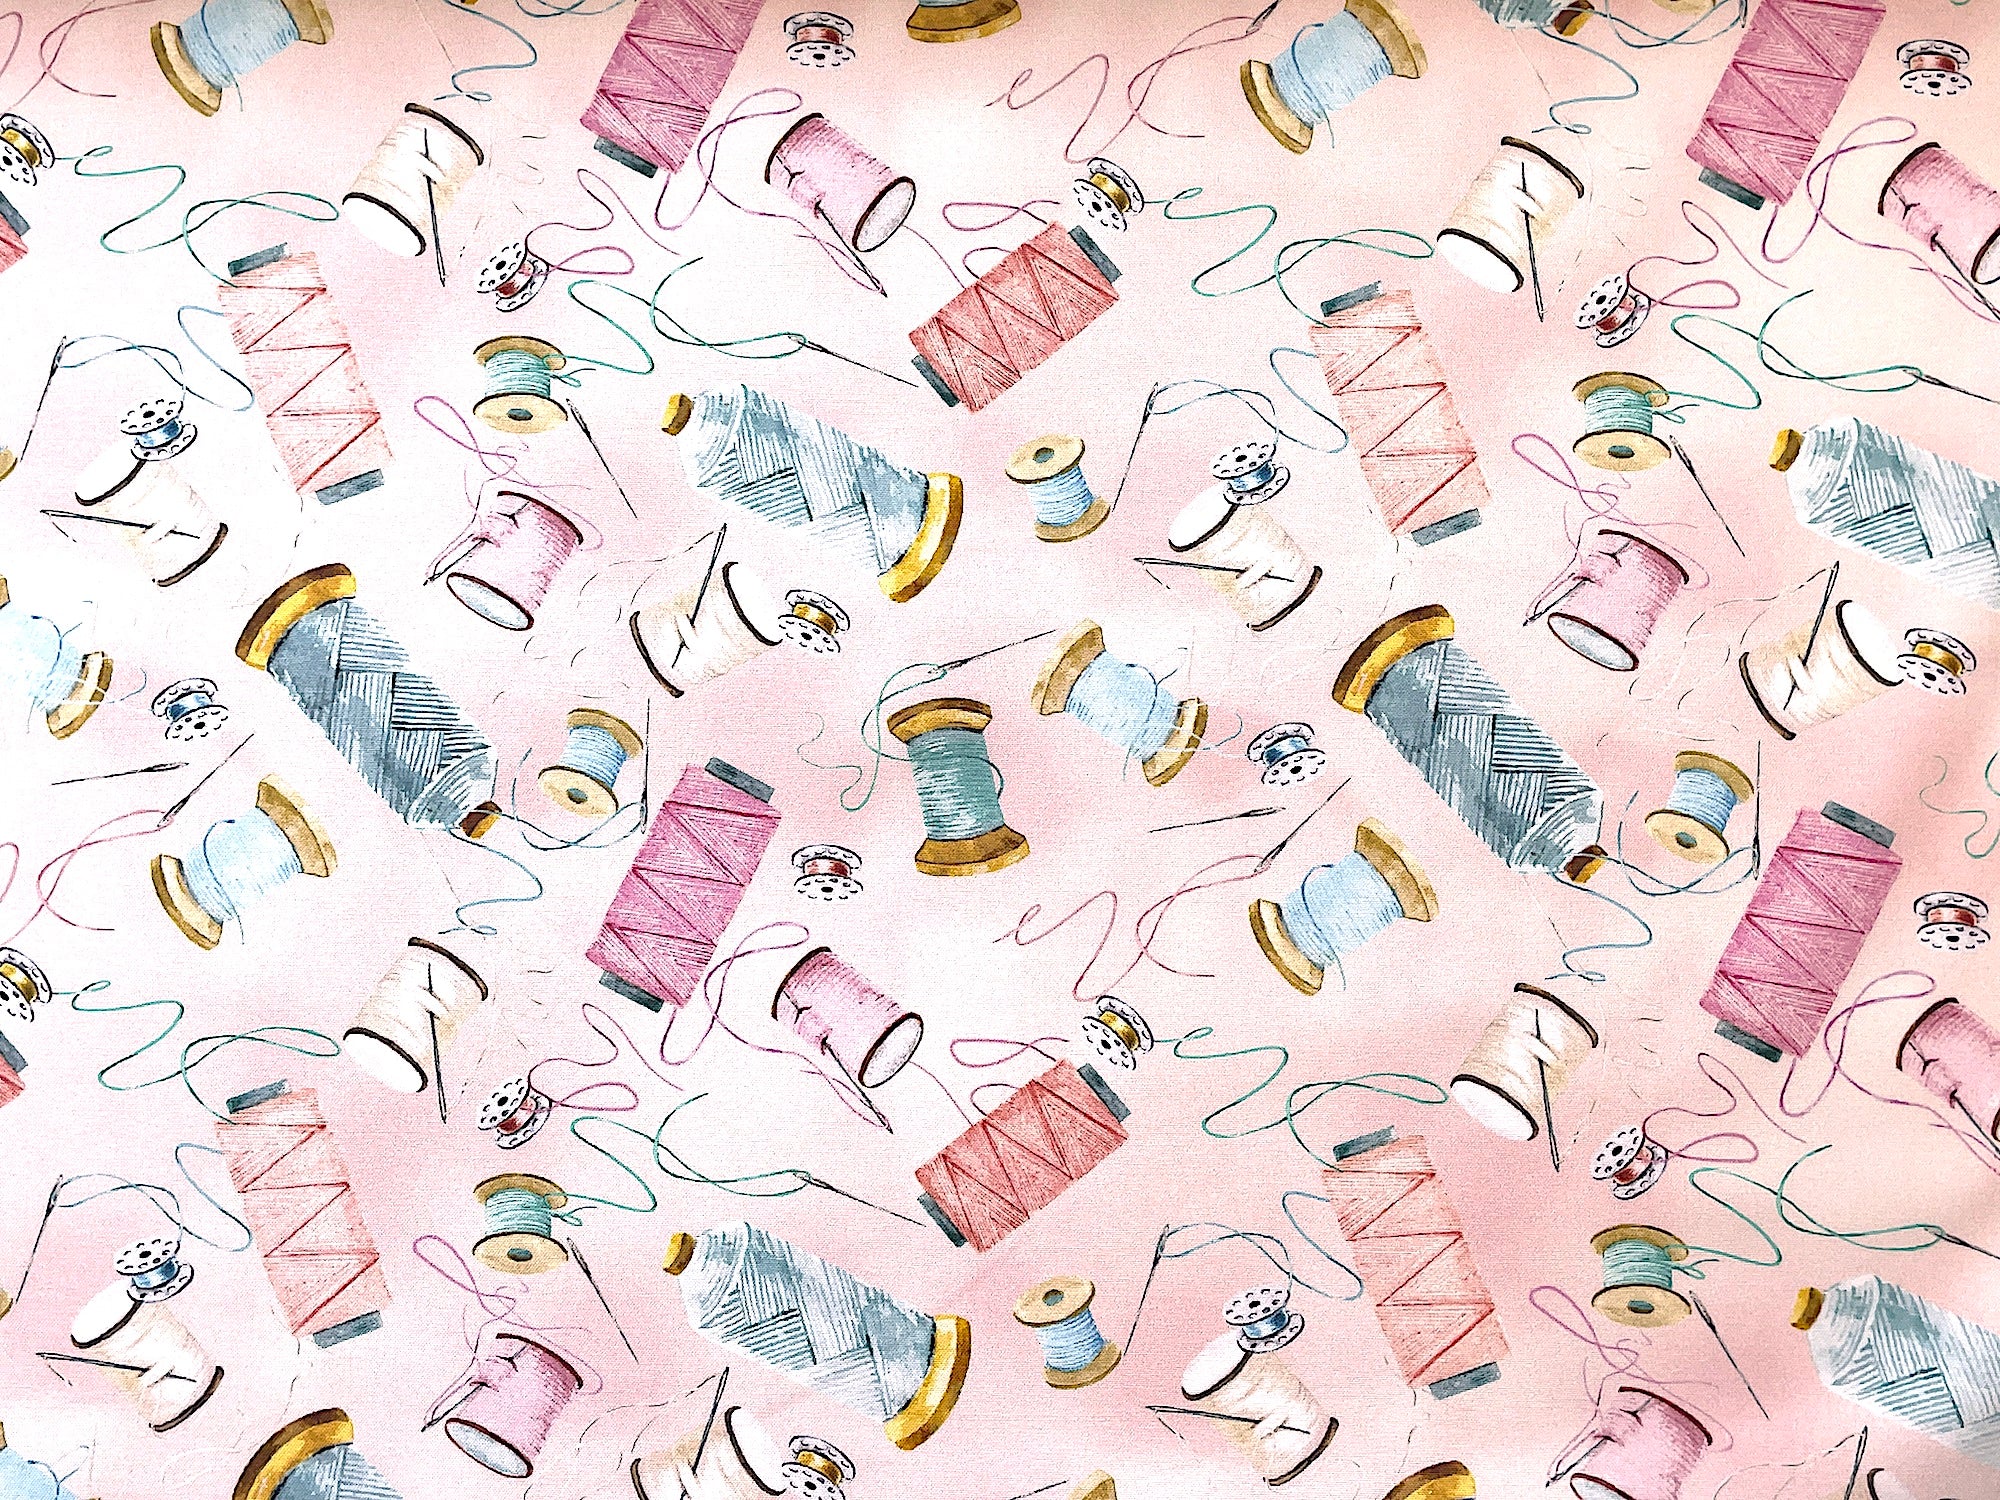 This fabric is part of the Sew in Love Collection by Rockstar Sewing.  This light pink cotton fabric is  covered with spools of thread, bobbins and sewing needles.